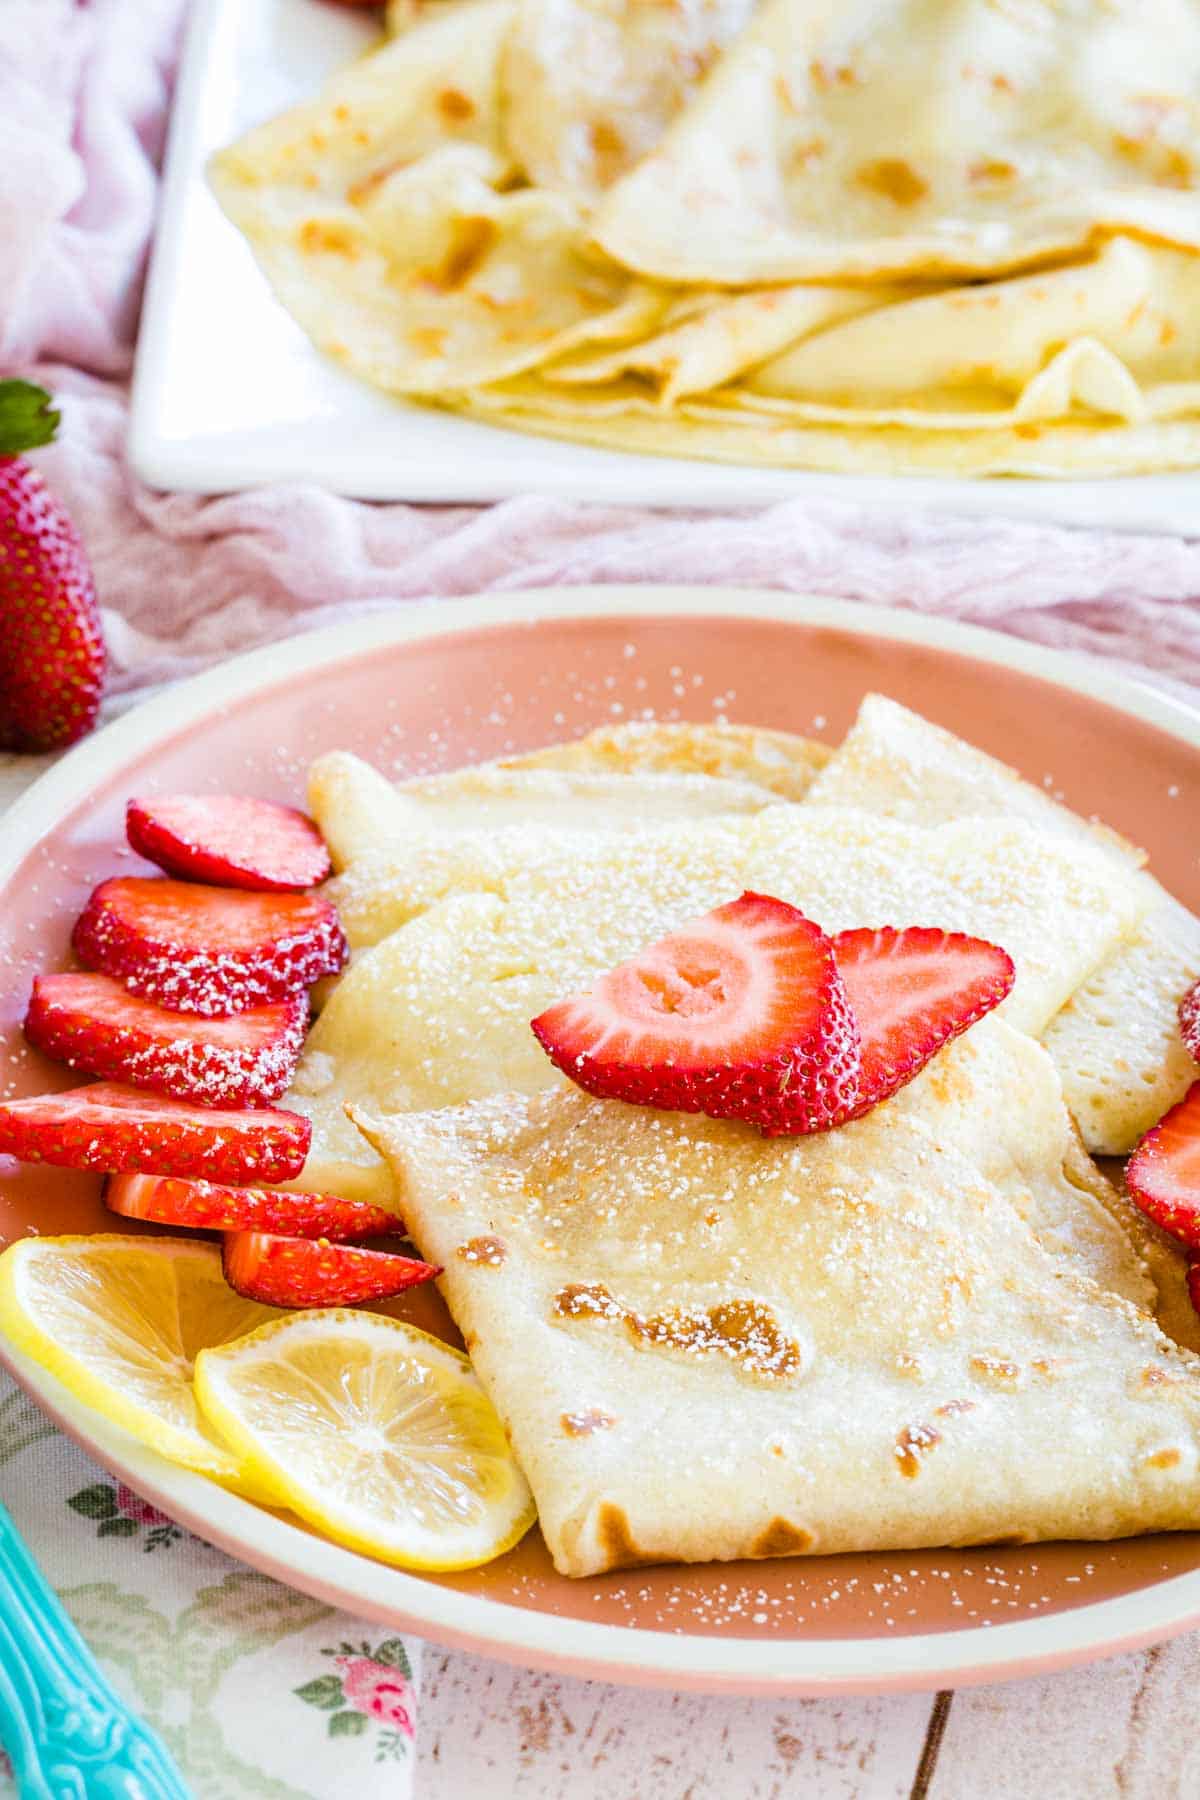 Gluten free crepes on a pink plate topped with strawberries, with more crepes on a serving tray in the background.